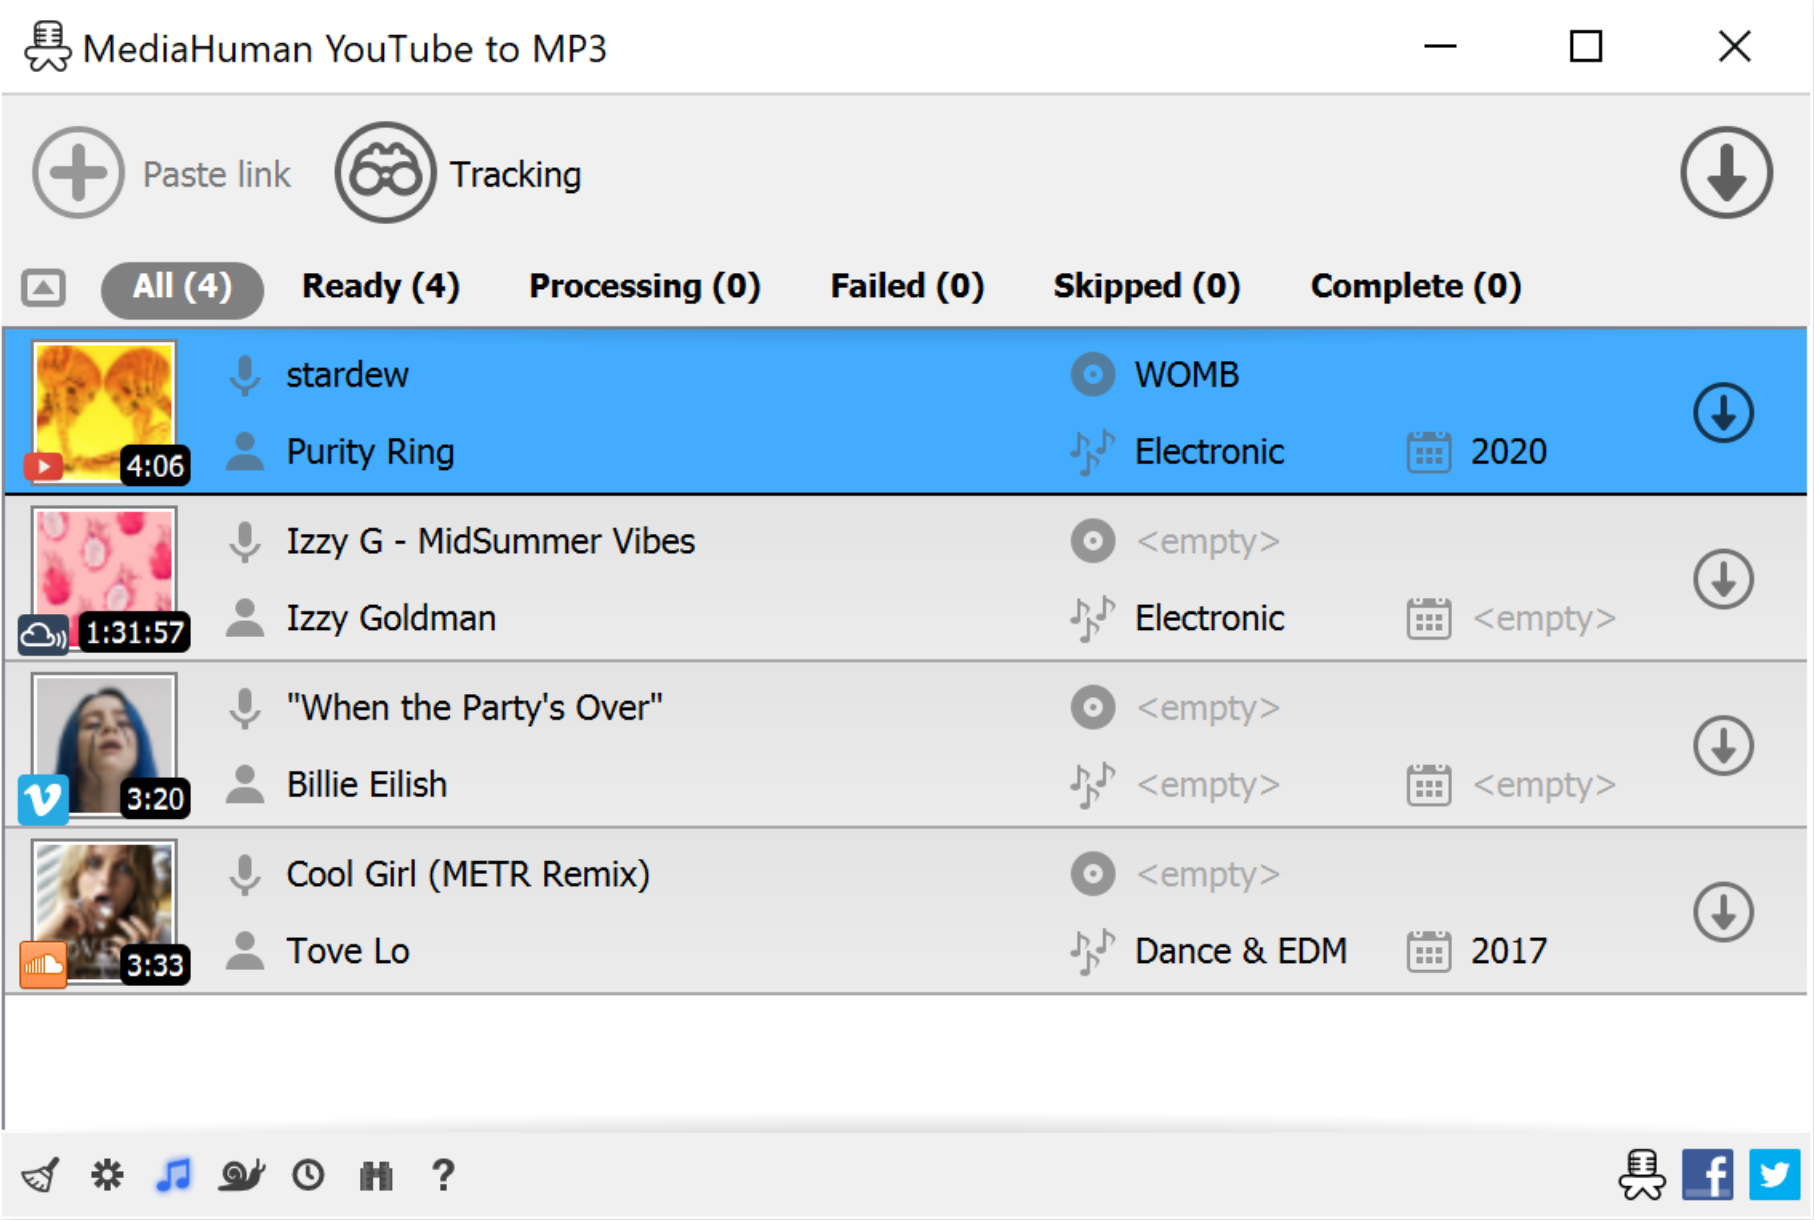 free youtube to mp3 converter online